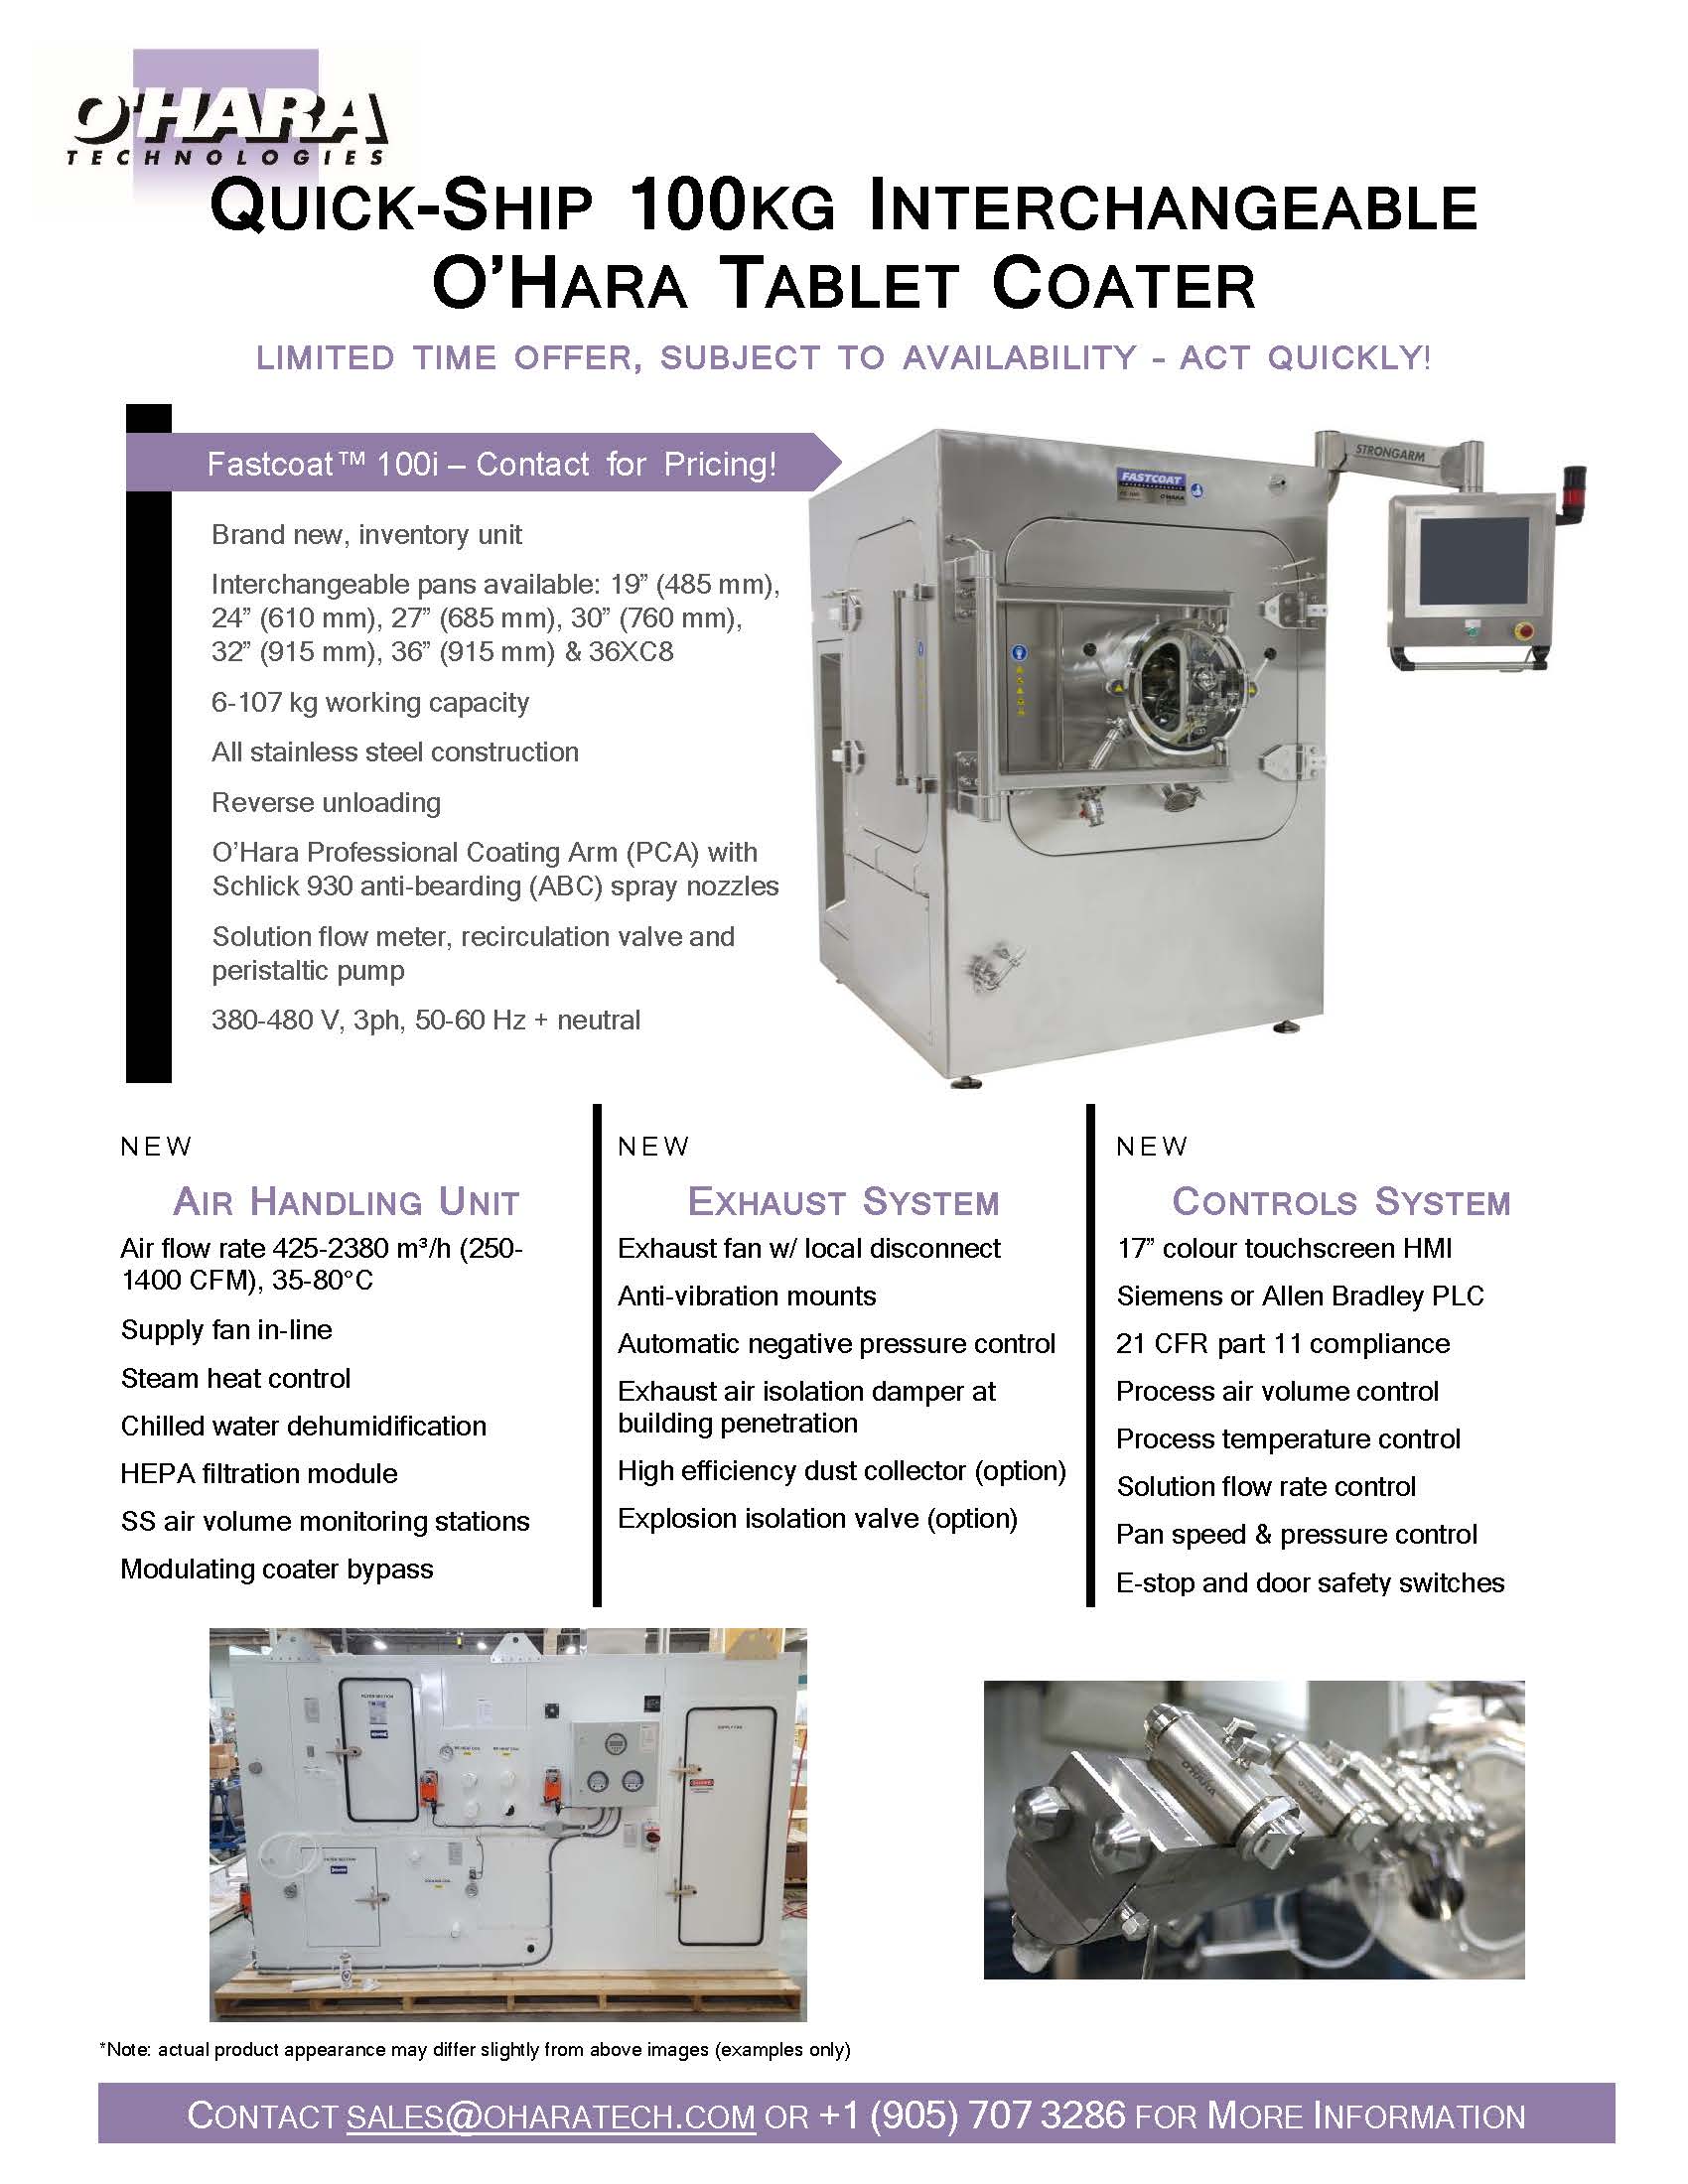 BRAND NEW QUICK-SHIP 100 KG INTERCHANGEABLE O'HARA TABLET COATER 